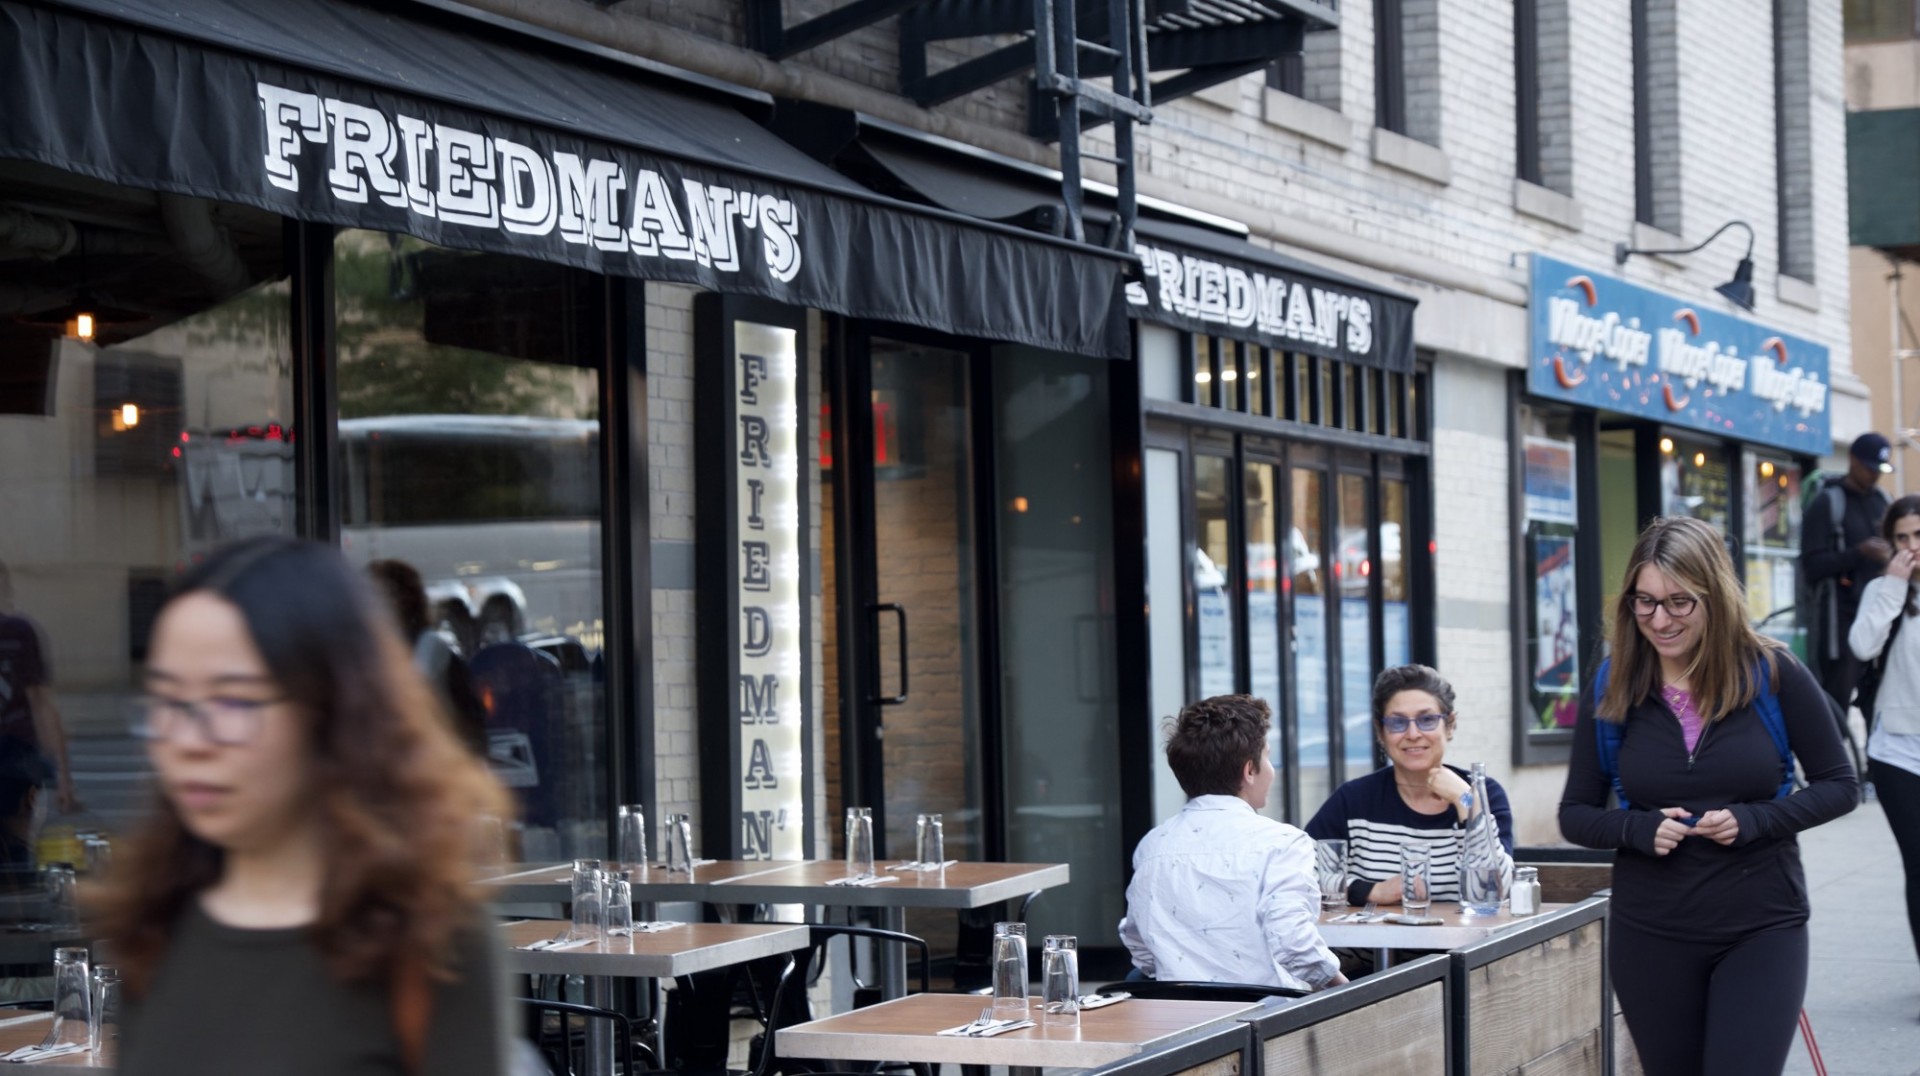 A variety of restaurants, shops, and bookstores can be found nearby on Broadway and Amsterdam Avenue.